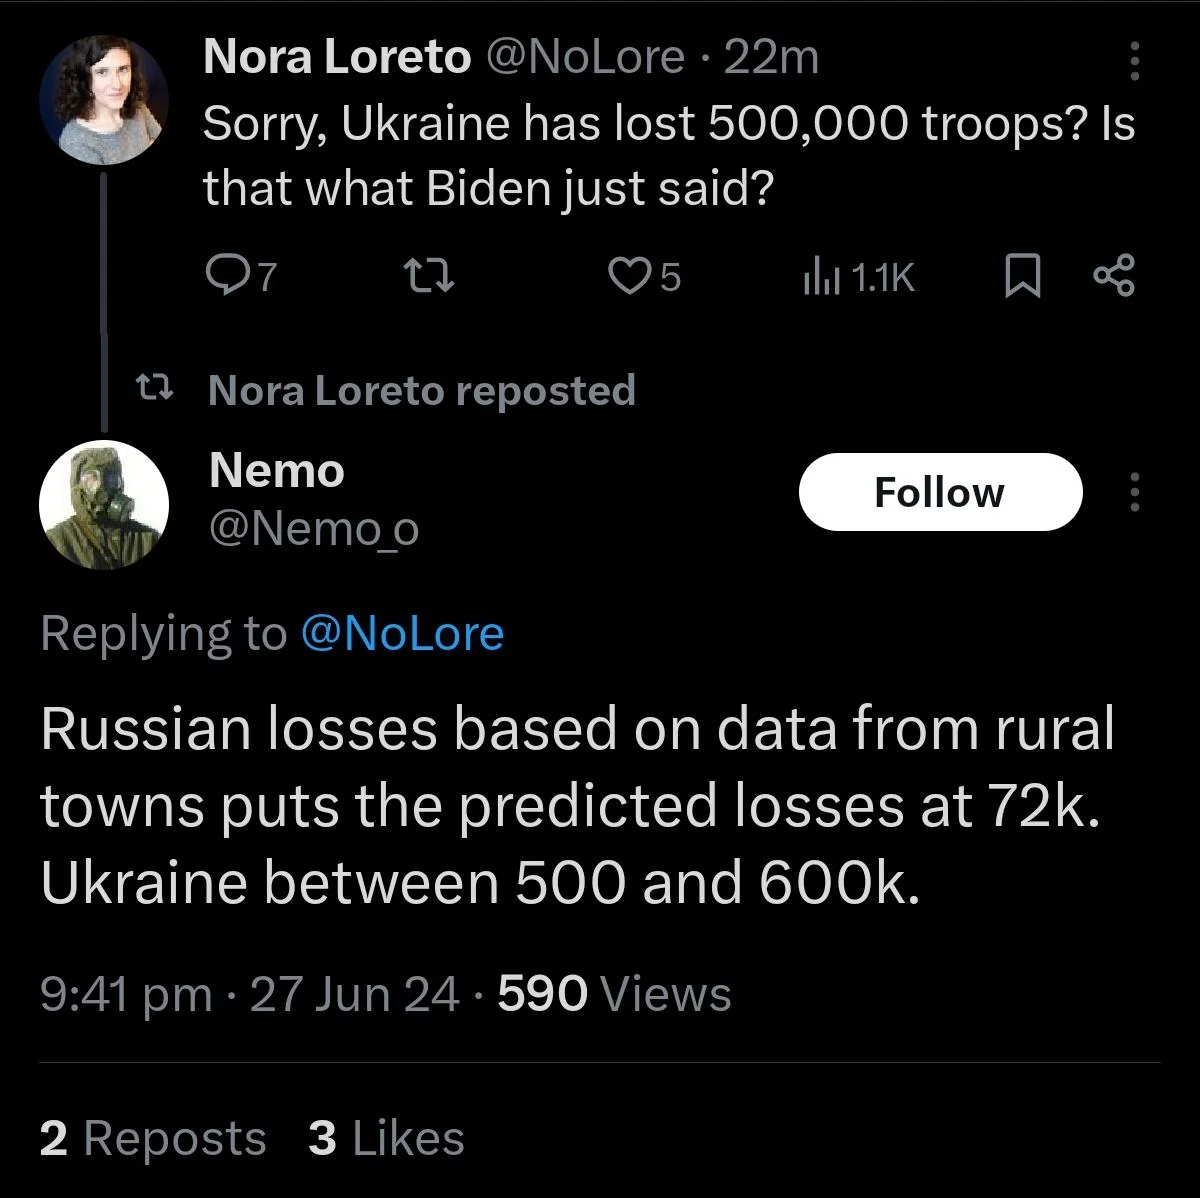 Person 1: "Sorry, Ukraine has lost half a million troops? Is that what Biden just said?" Person 2: "Russian losses based on data from rural towns puts the predicted losses at 72 thousand. Ukraine between 500 and 600 thousand."